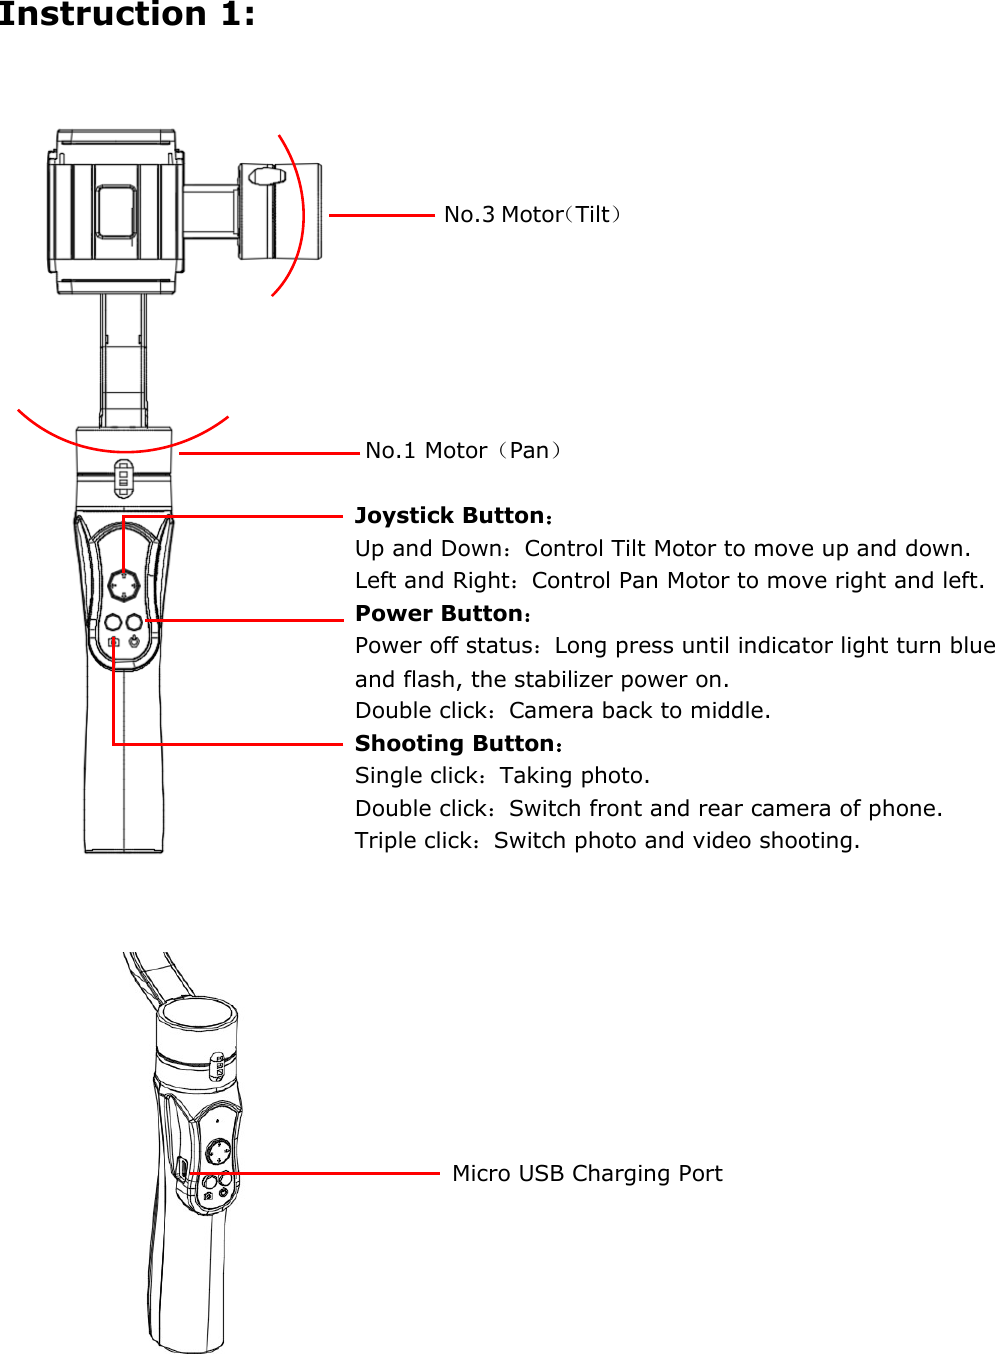  Instruction 1:              No.1 Motor（Pan）  Joystick Button： Up and Down：Control Tilt Motor to move up and down. Left and Right：Control Pan Motor to move right and left. Power Button： Power off status：Long press until indicator light turn blue and flash, the stabilizer power on. Double click：Camera back to middle. Shooting Button： Single click：Taking photo. Double click：Switch front and rear camera of phone. Triple click：Switch photo and video shooting.    Micro USB Charging Port No.3 Motor（Tilt） 